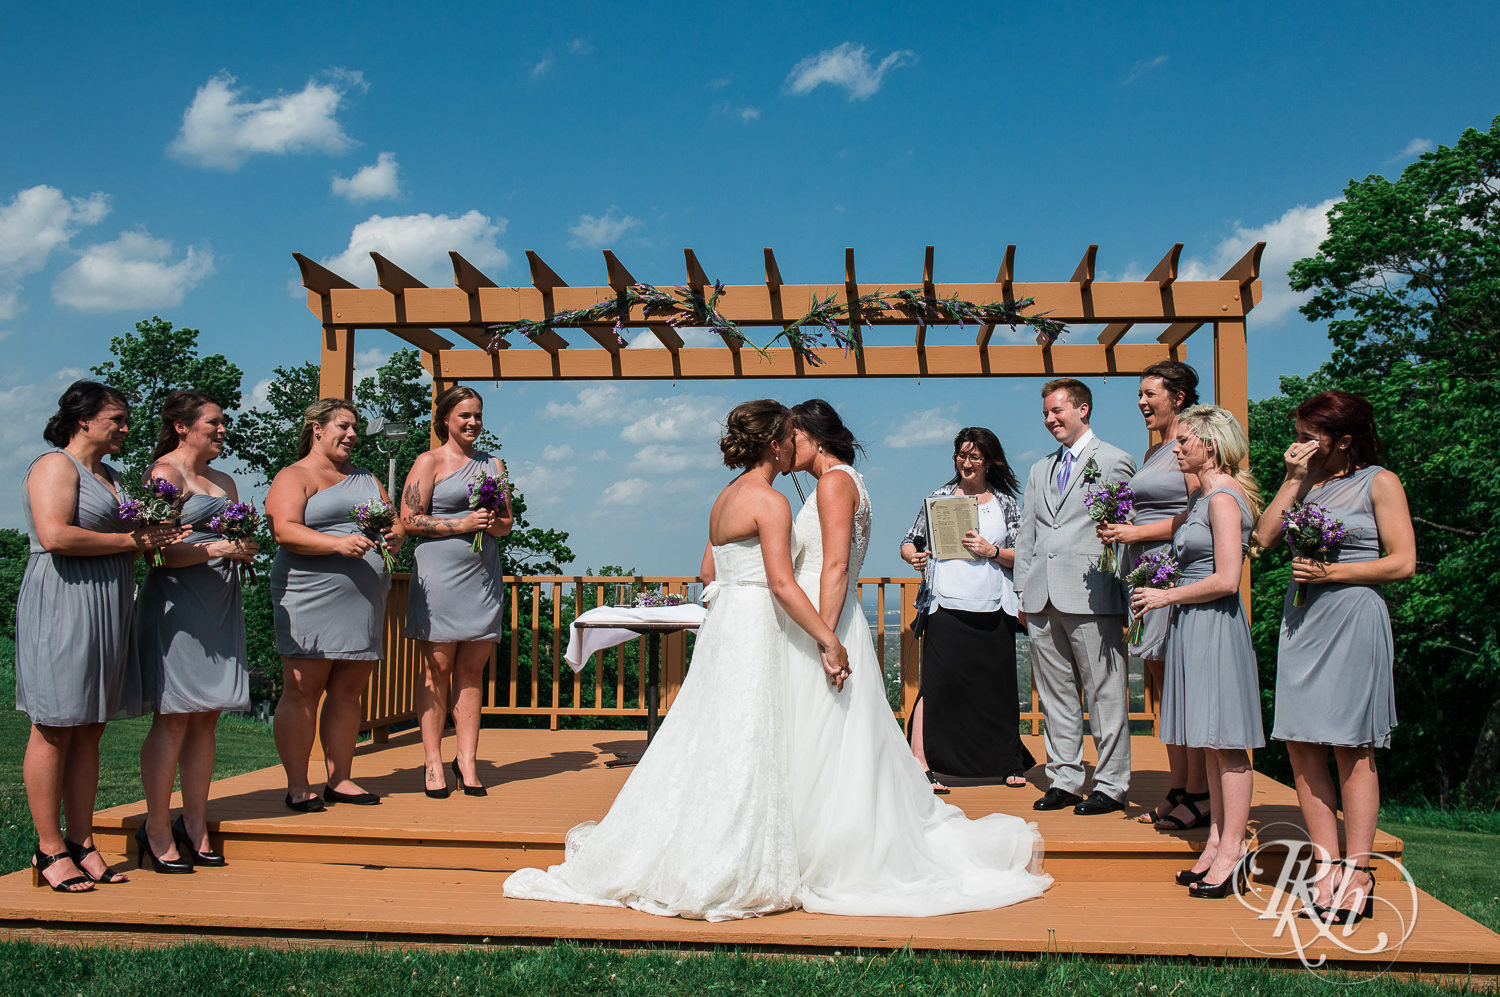 Lesbian brides kiss during outdoor ceremony at Spirit Mountain in Duluth, Minnesota.